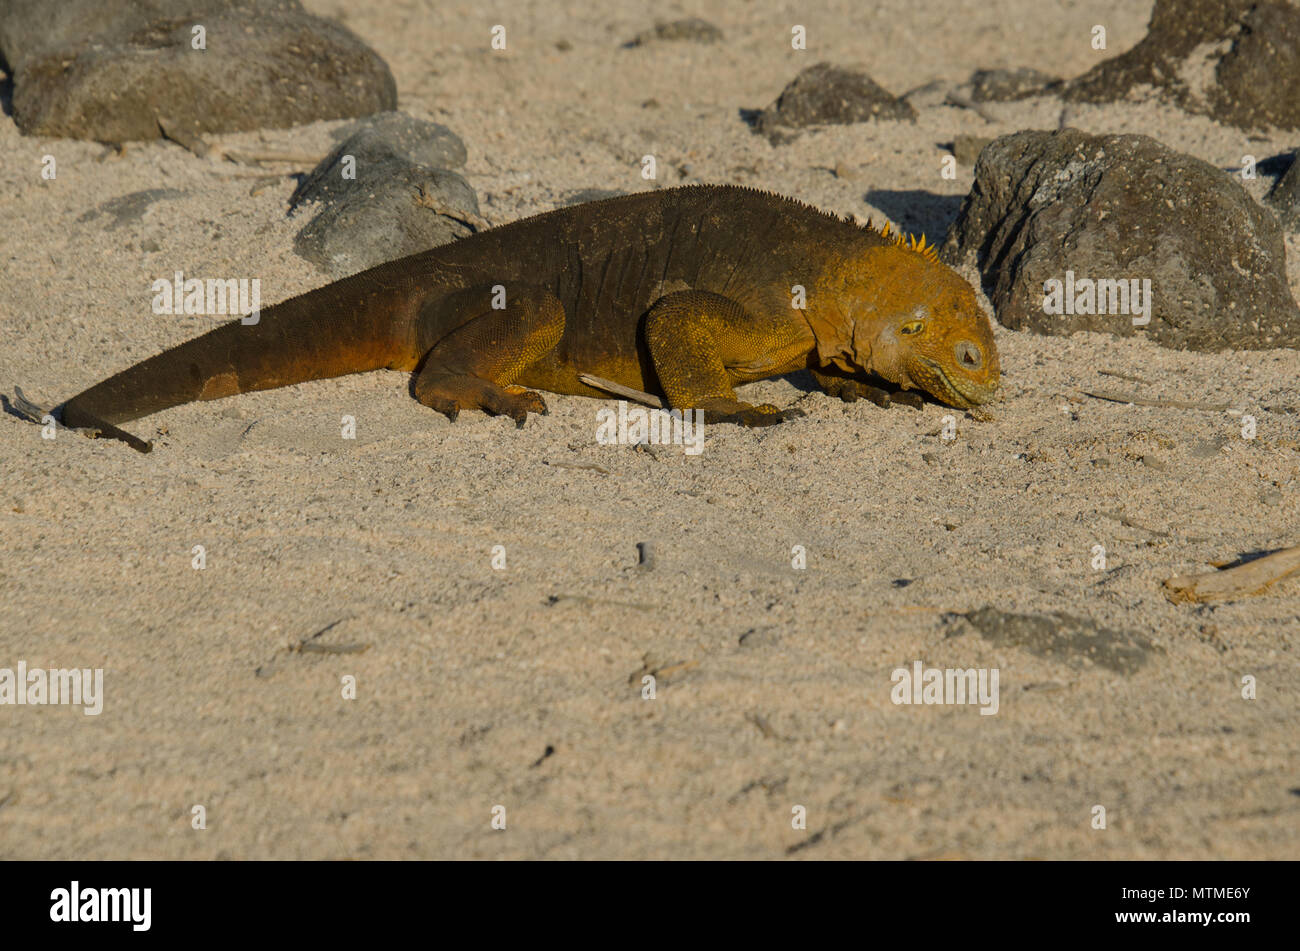 Land Iguana searches for food - North Seymour Island, Galapagos Islands. Darwins theory of evolution on display. Stock Photo